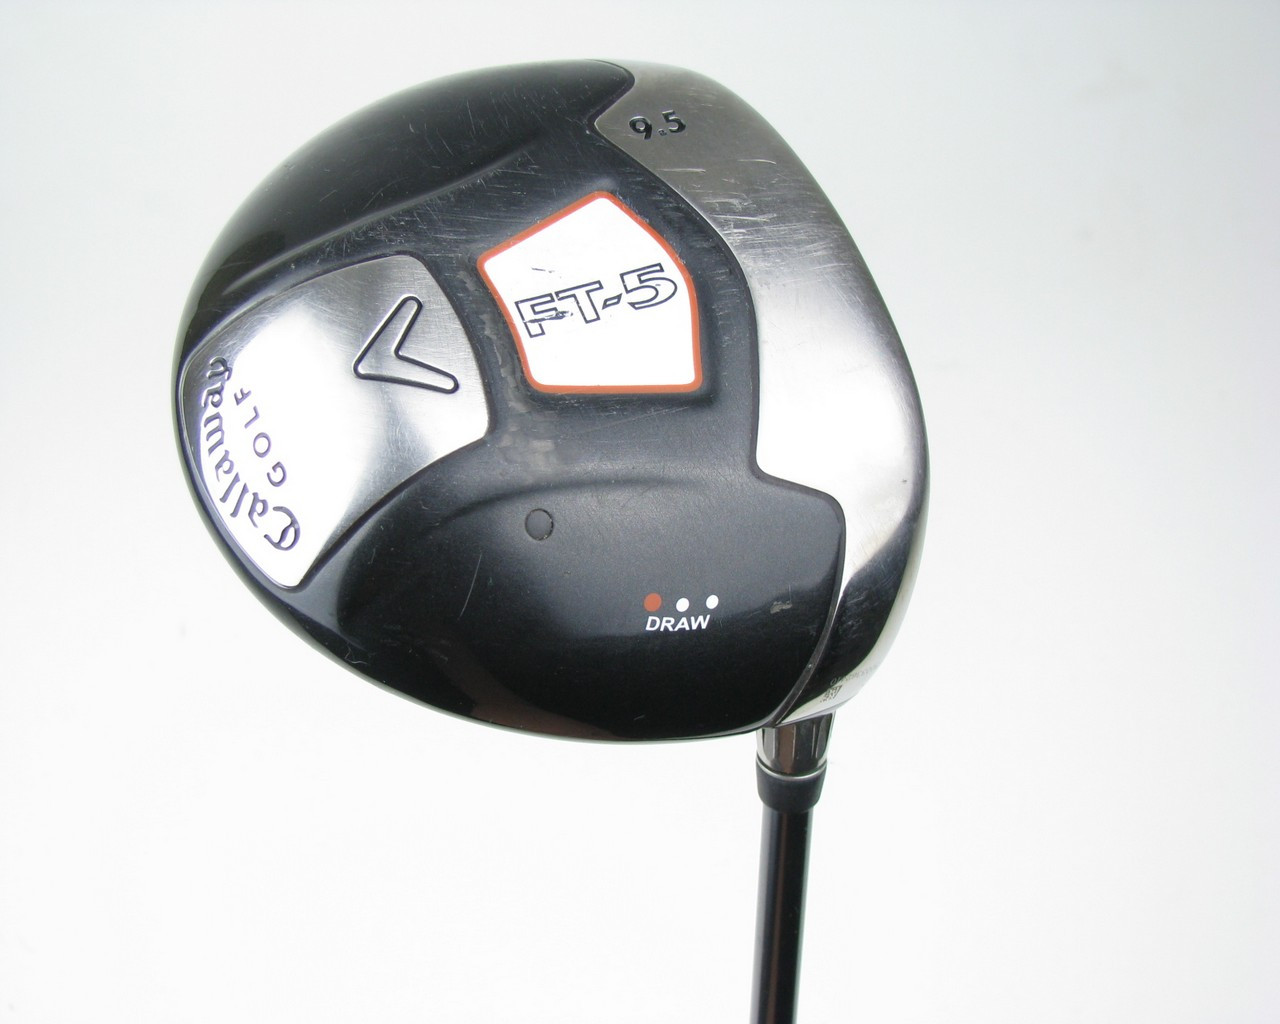 Callaway FT-5 I-MIX Driver 9.5* DRAW w/ Fujikura Speeder 686 Stiff (Out of  Stock) - Clubs n Covers Golf